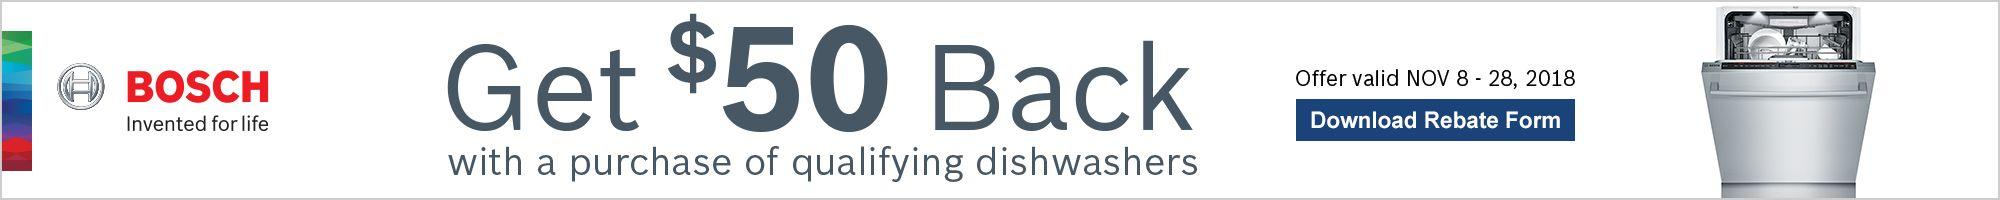 Bosch Invented for Life Logo - Bosch - Save $50 on Purchase of DishwasherSouth Bend, IN